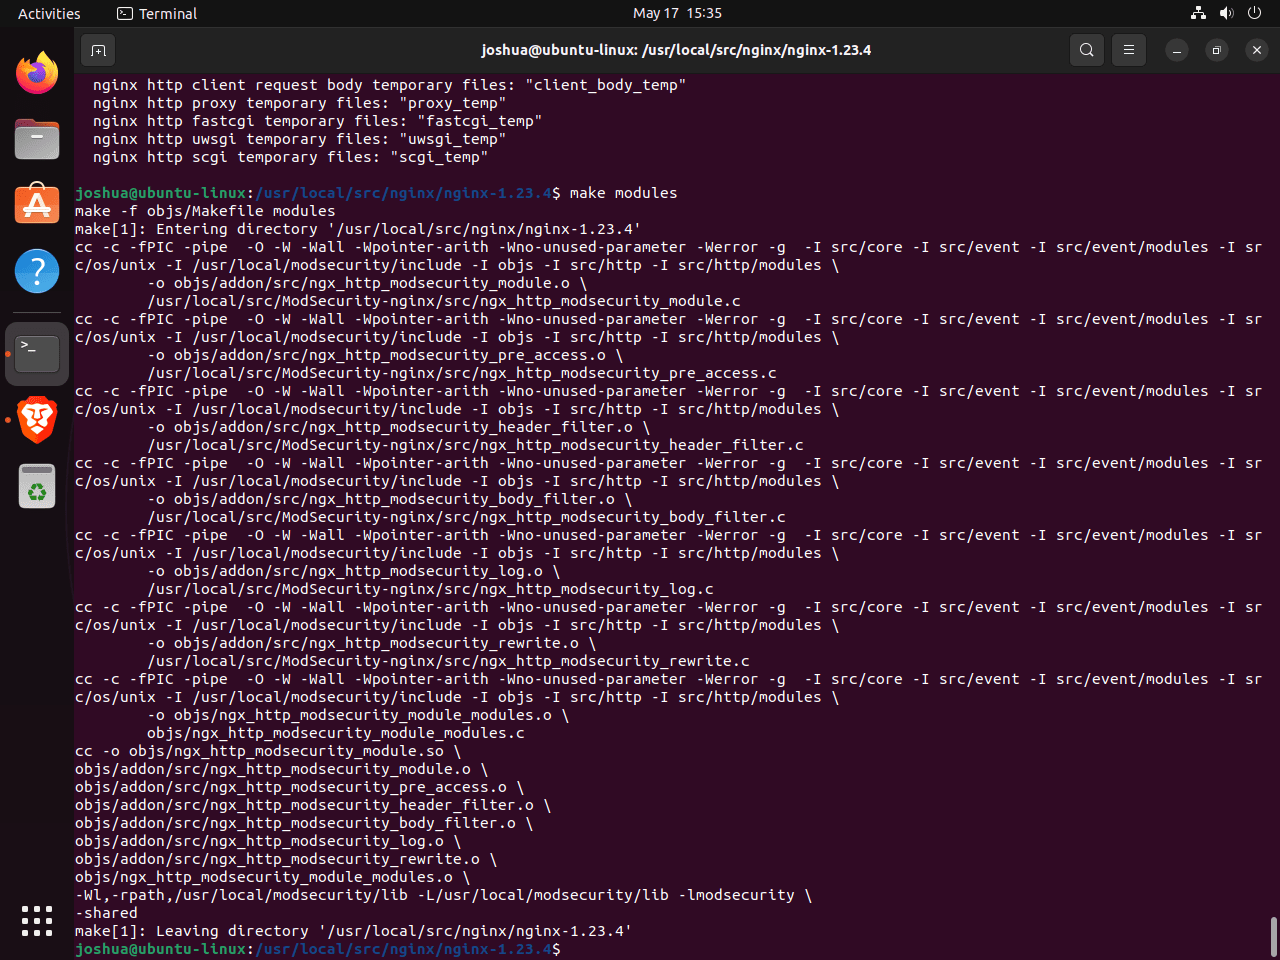 example of make modules terminal output for modsecurity nginx connector on ubuntu linux